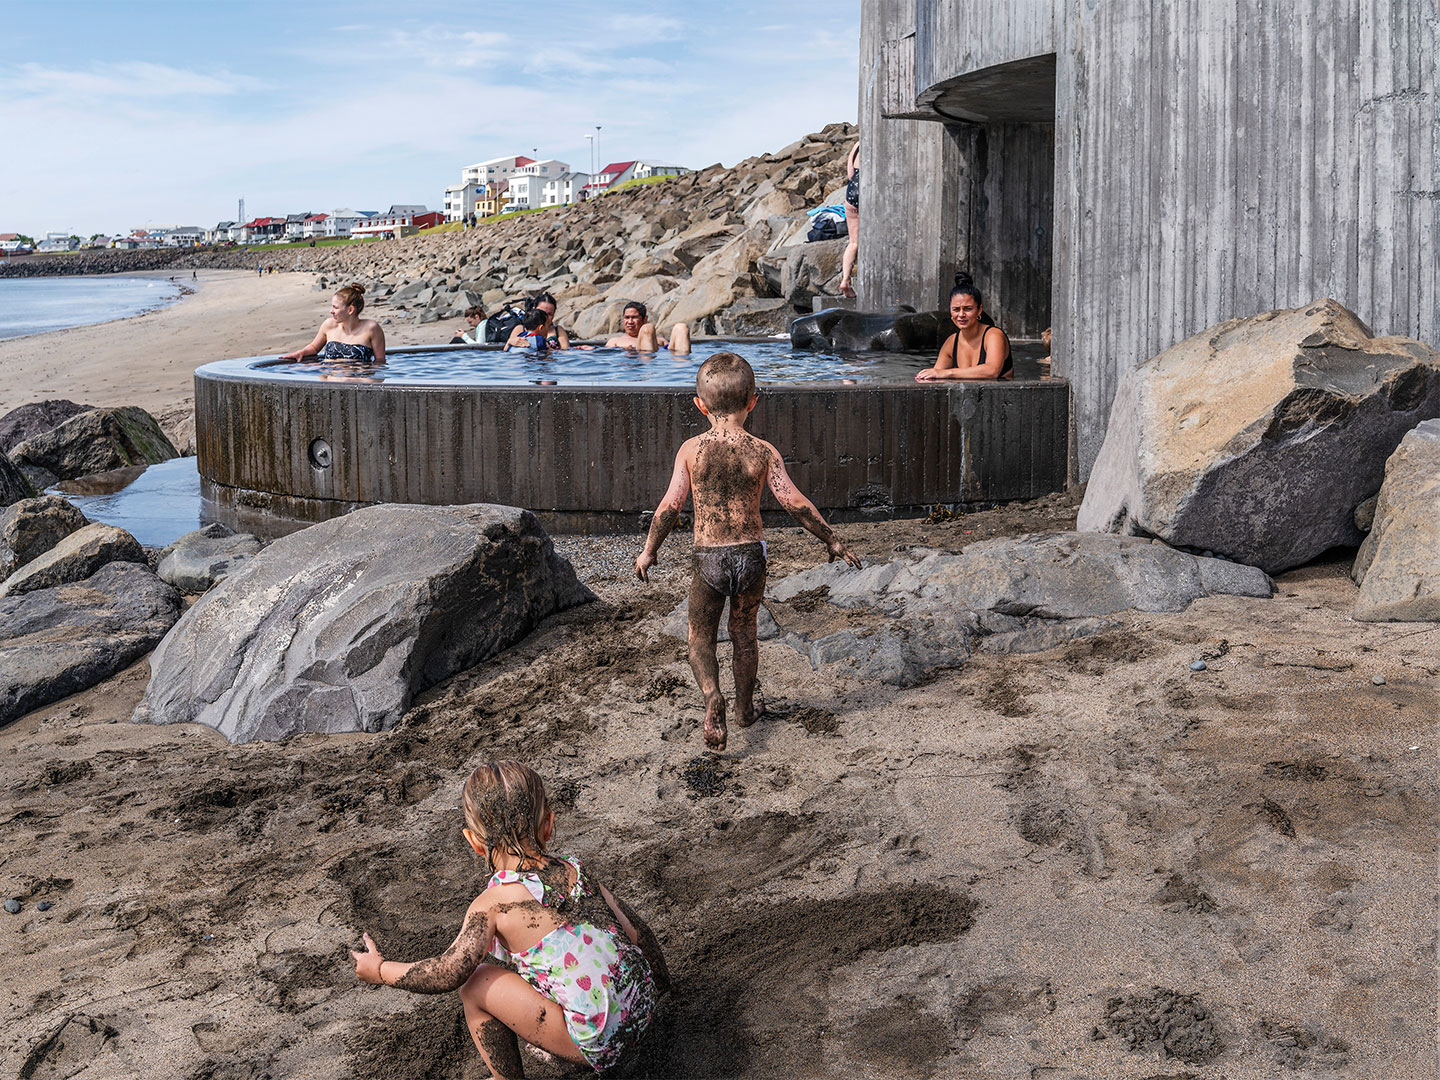 Guolaug baths in Iceland by Basalt Architects